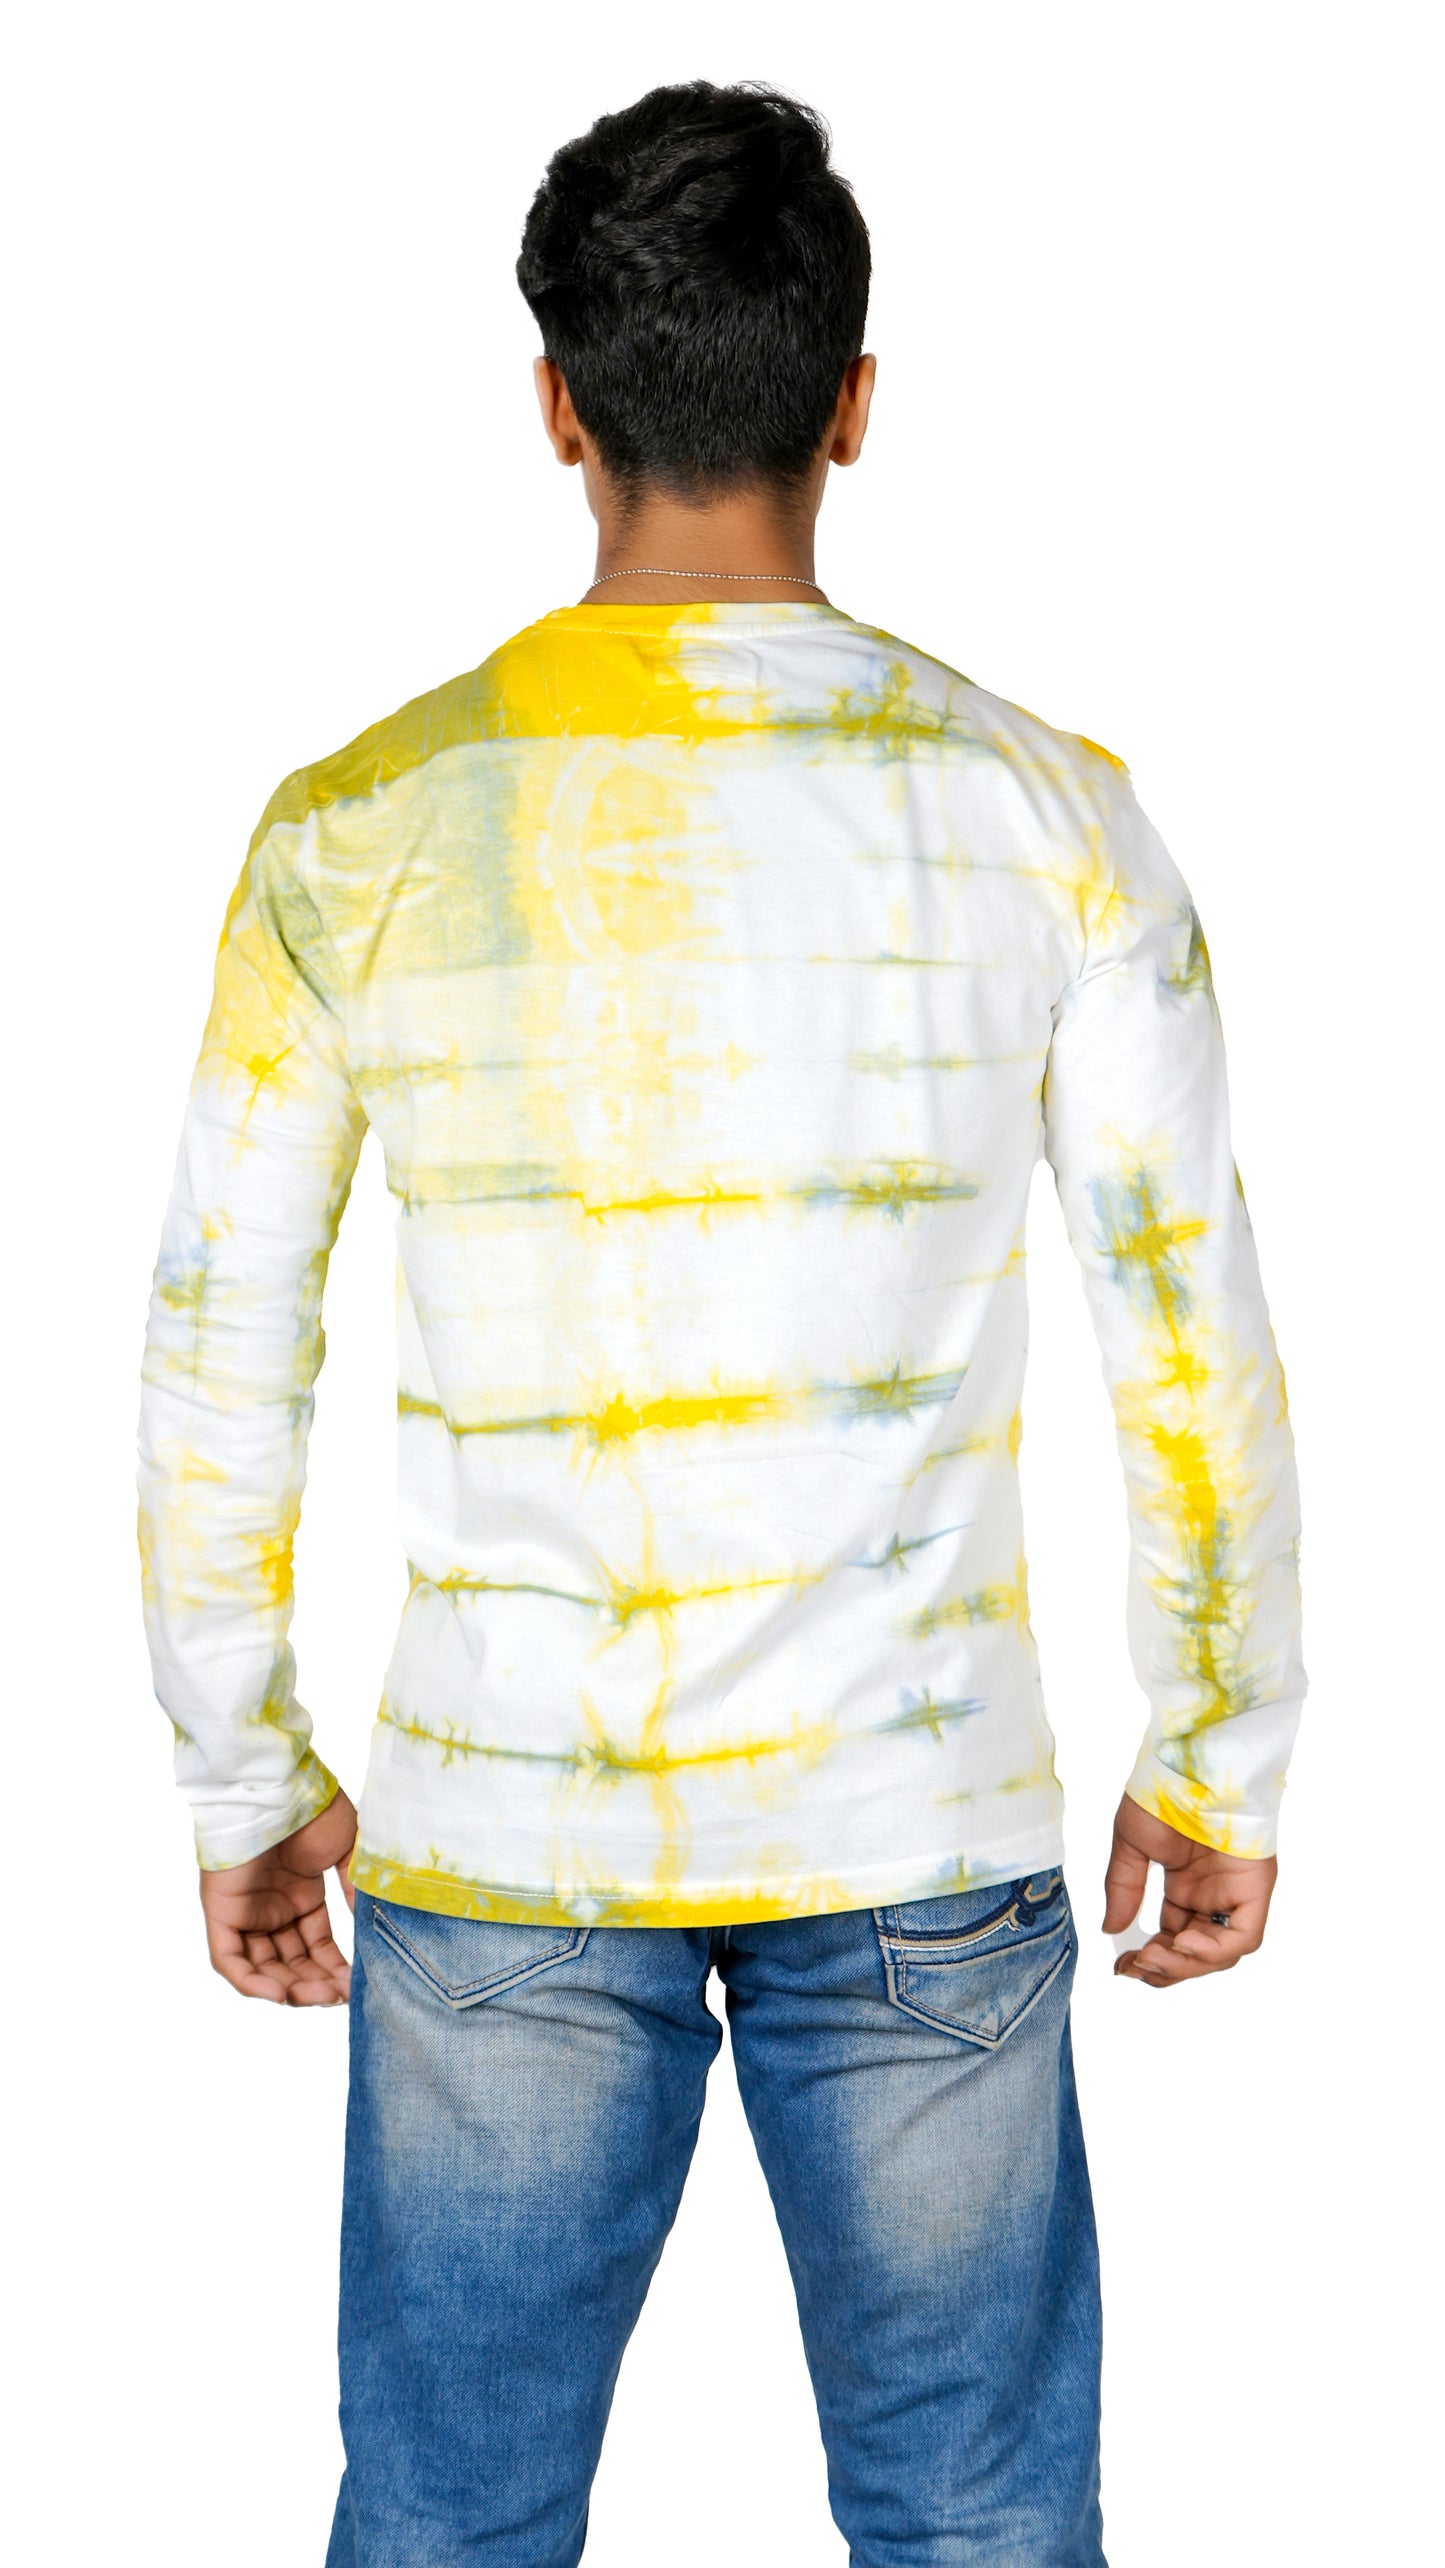 Lafangah Men's Tie and Dye Graphics Printed Full Sleeve Round Neck White Cotton Slim Fit T-Shirt